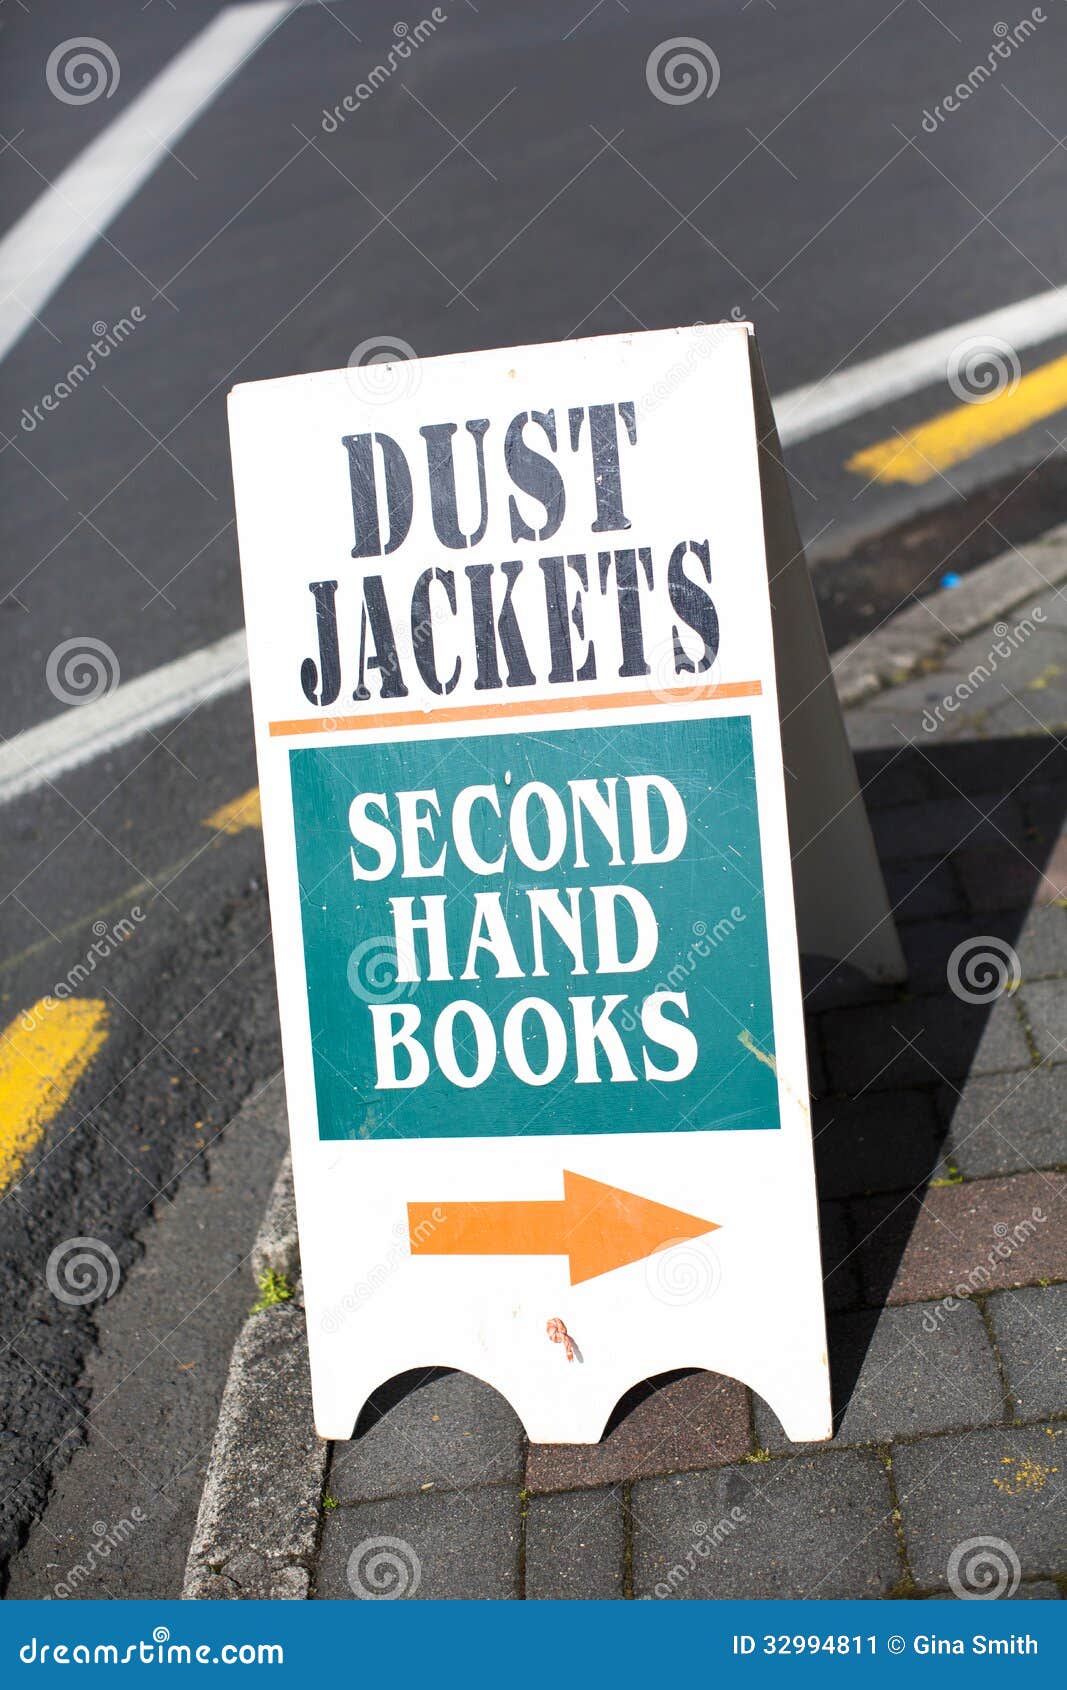 secondhand book sign.